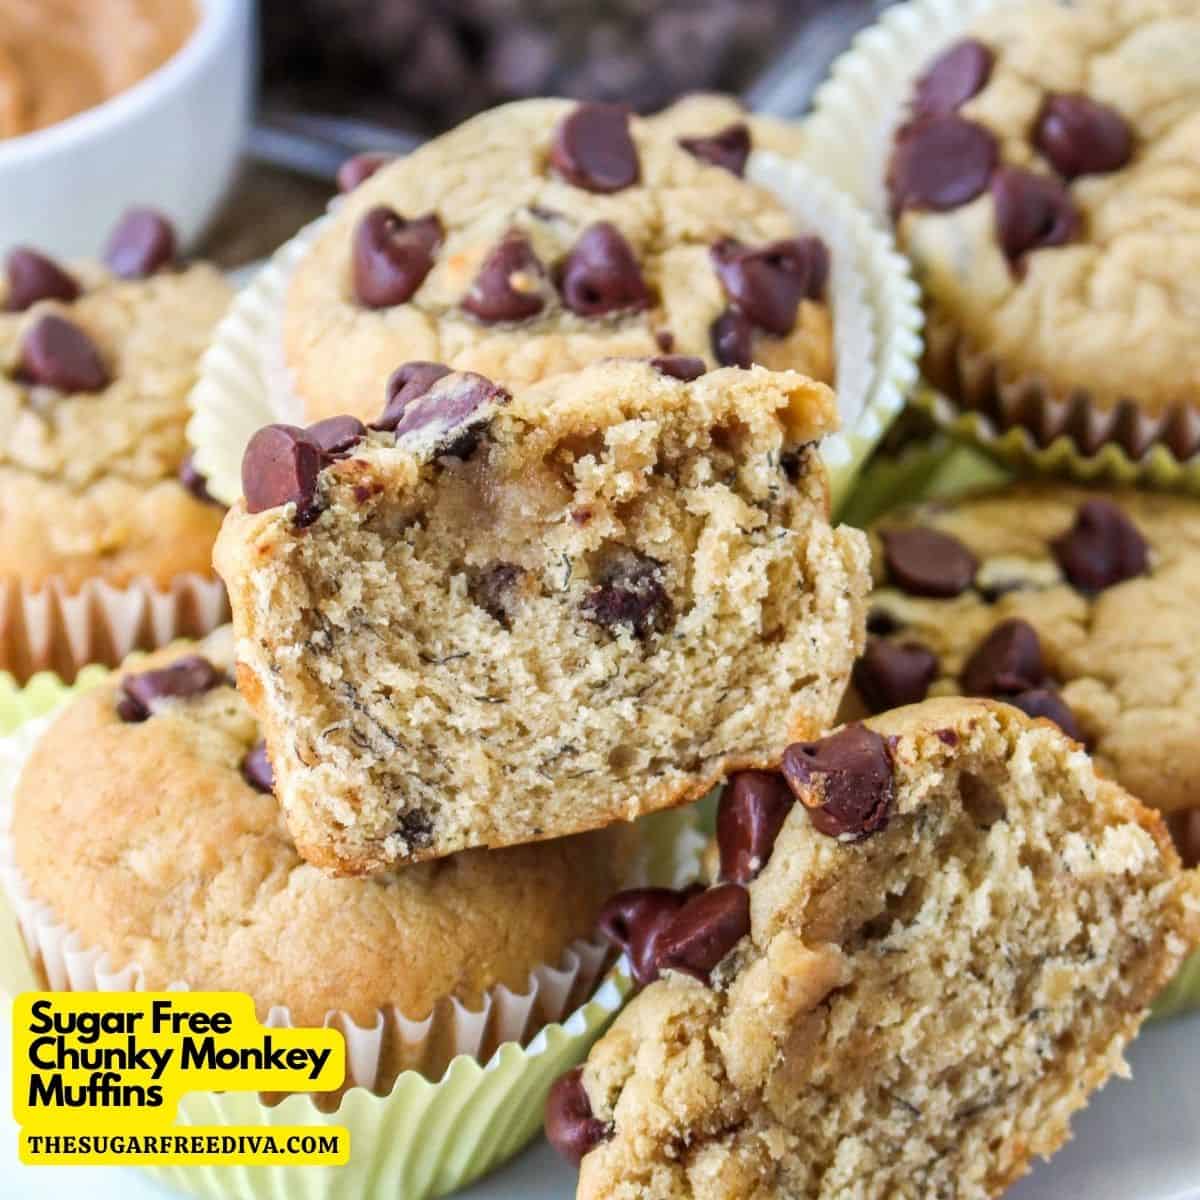 Sugar Free Chunky Monkey Muffins, a delicious and simple recipe featuring  bananas, chocolate chips, and peanut butter. No added sugar.